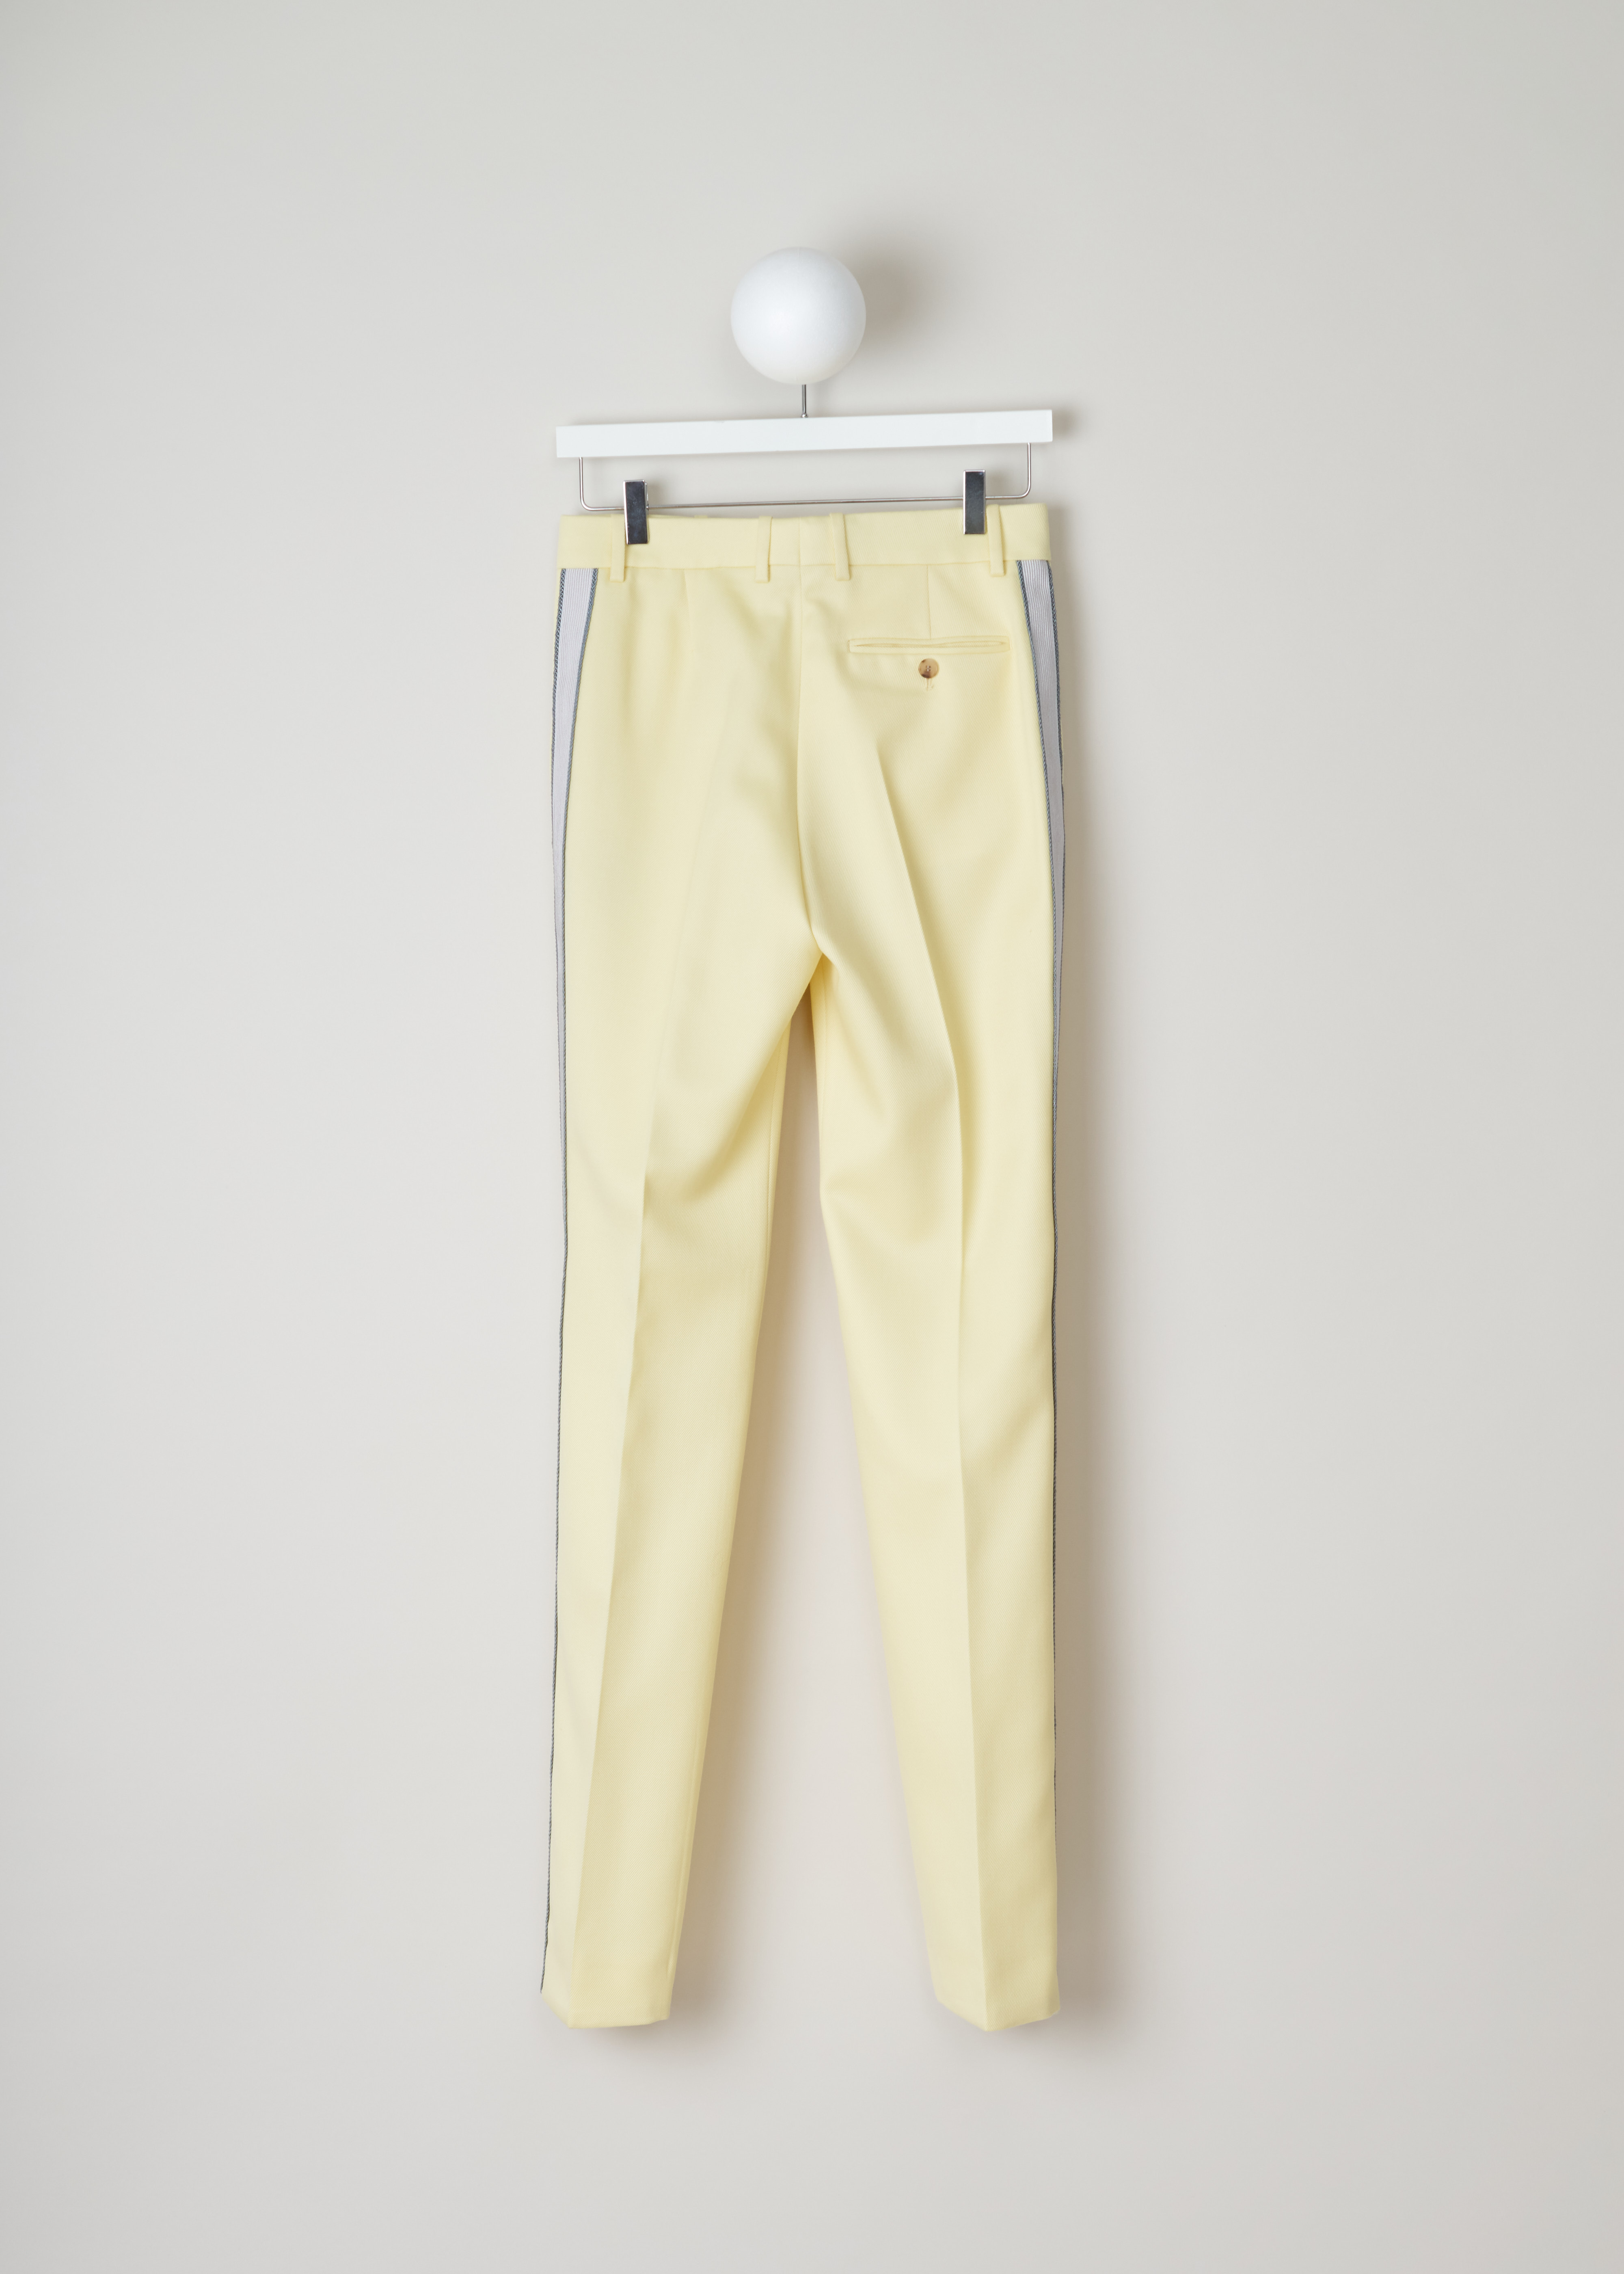 Buy Beige Solid Women Trouser Cotton Flax Fabric for Best Price, Reviews,  Free Shipping